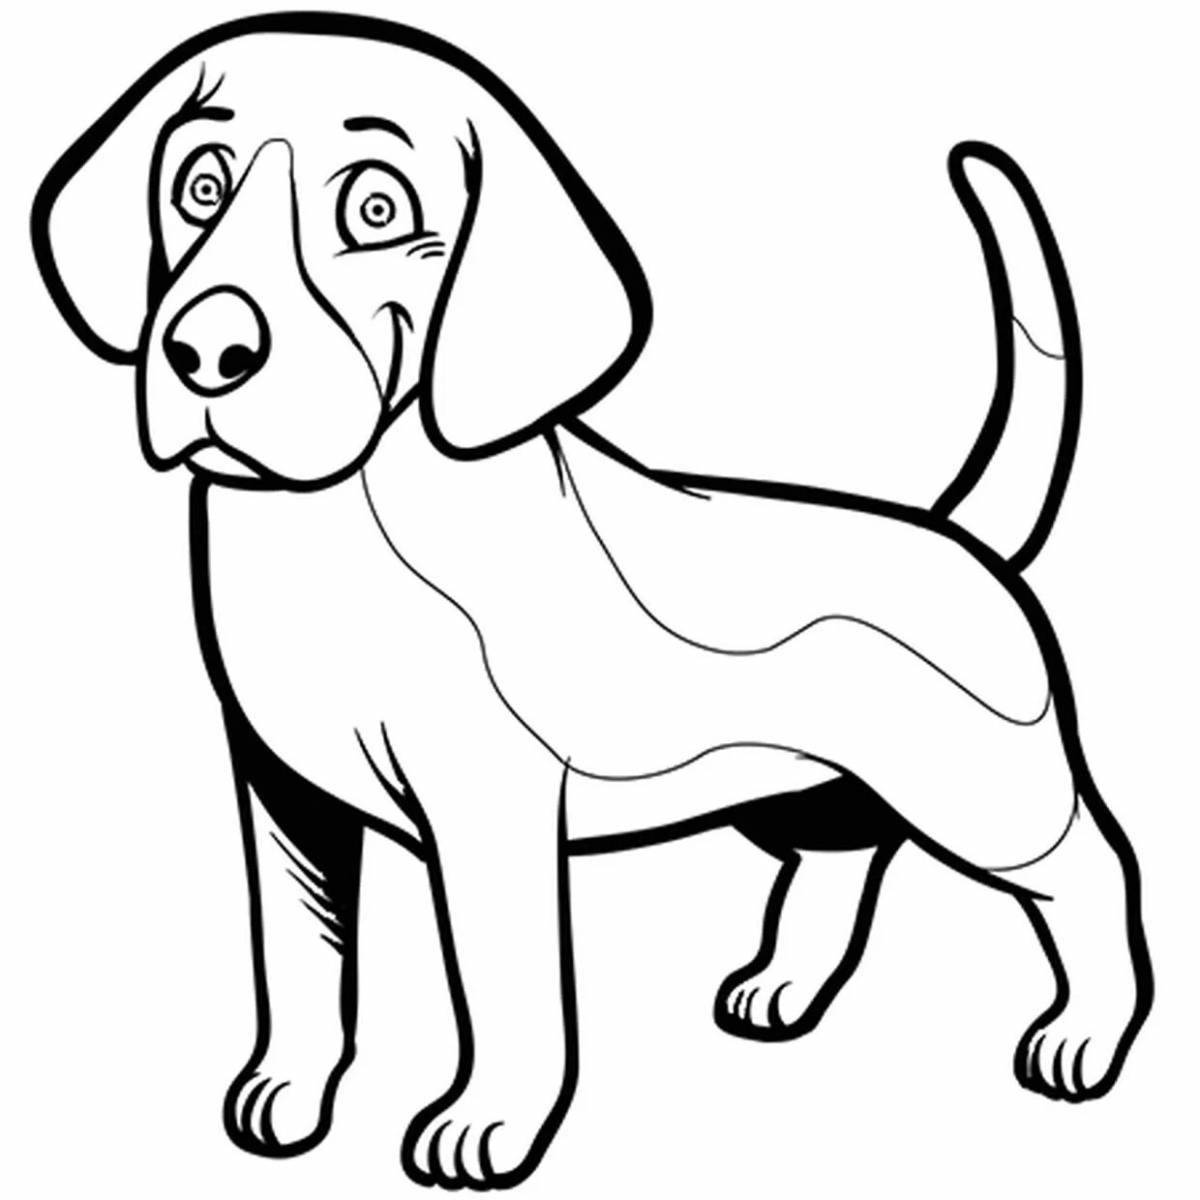 Bright light dog coloring page